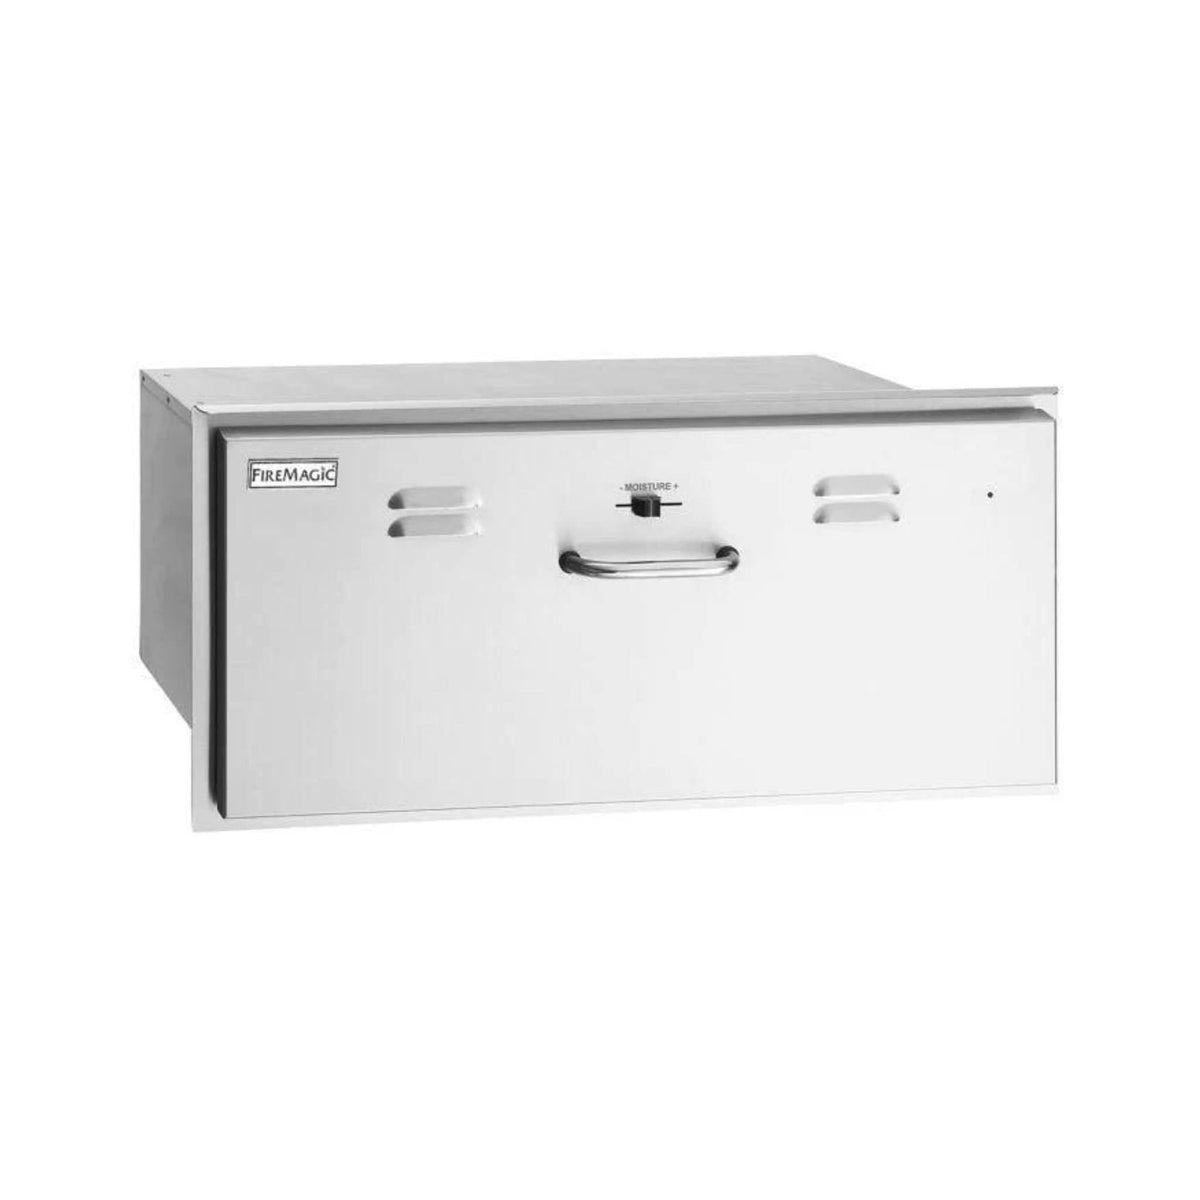 Fire Magic Flush Mounted Outdoor Warming Drawer with Moisture Regulation and Concealed Control